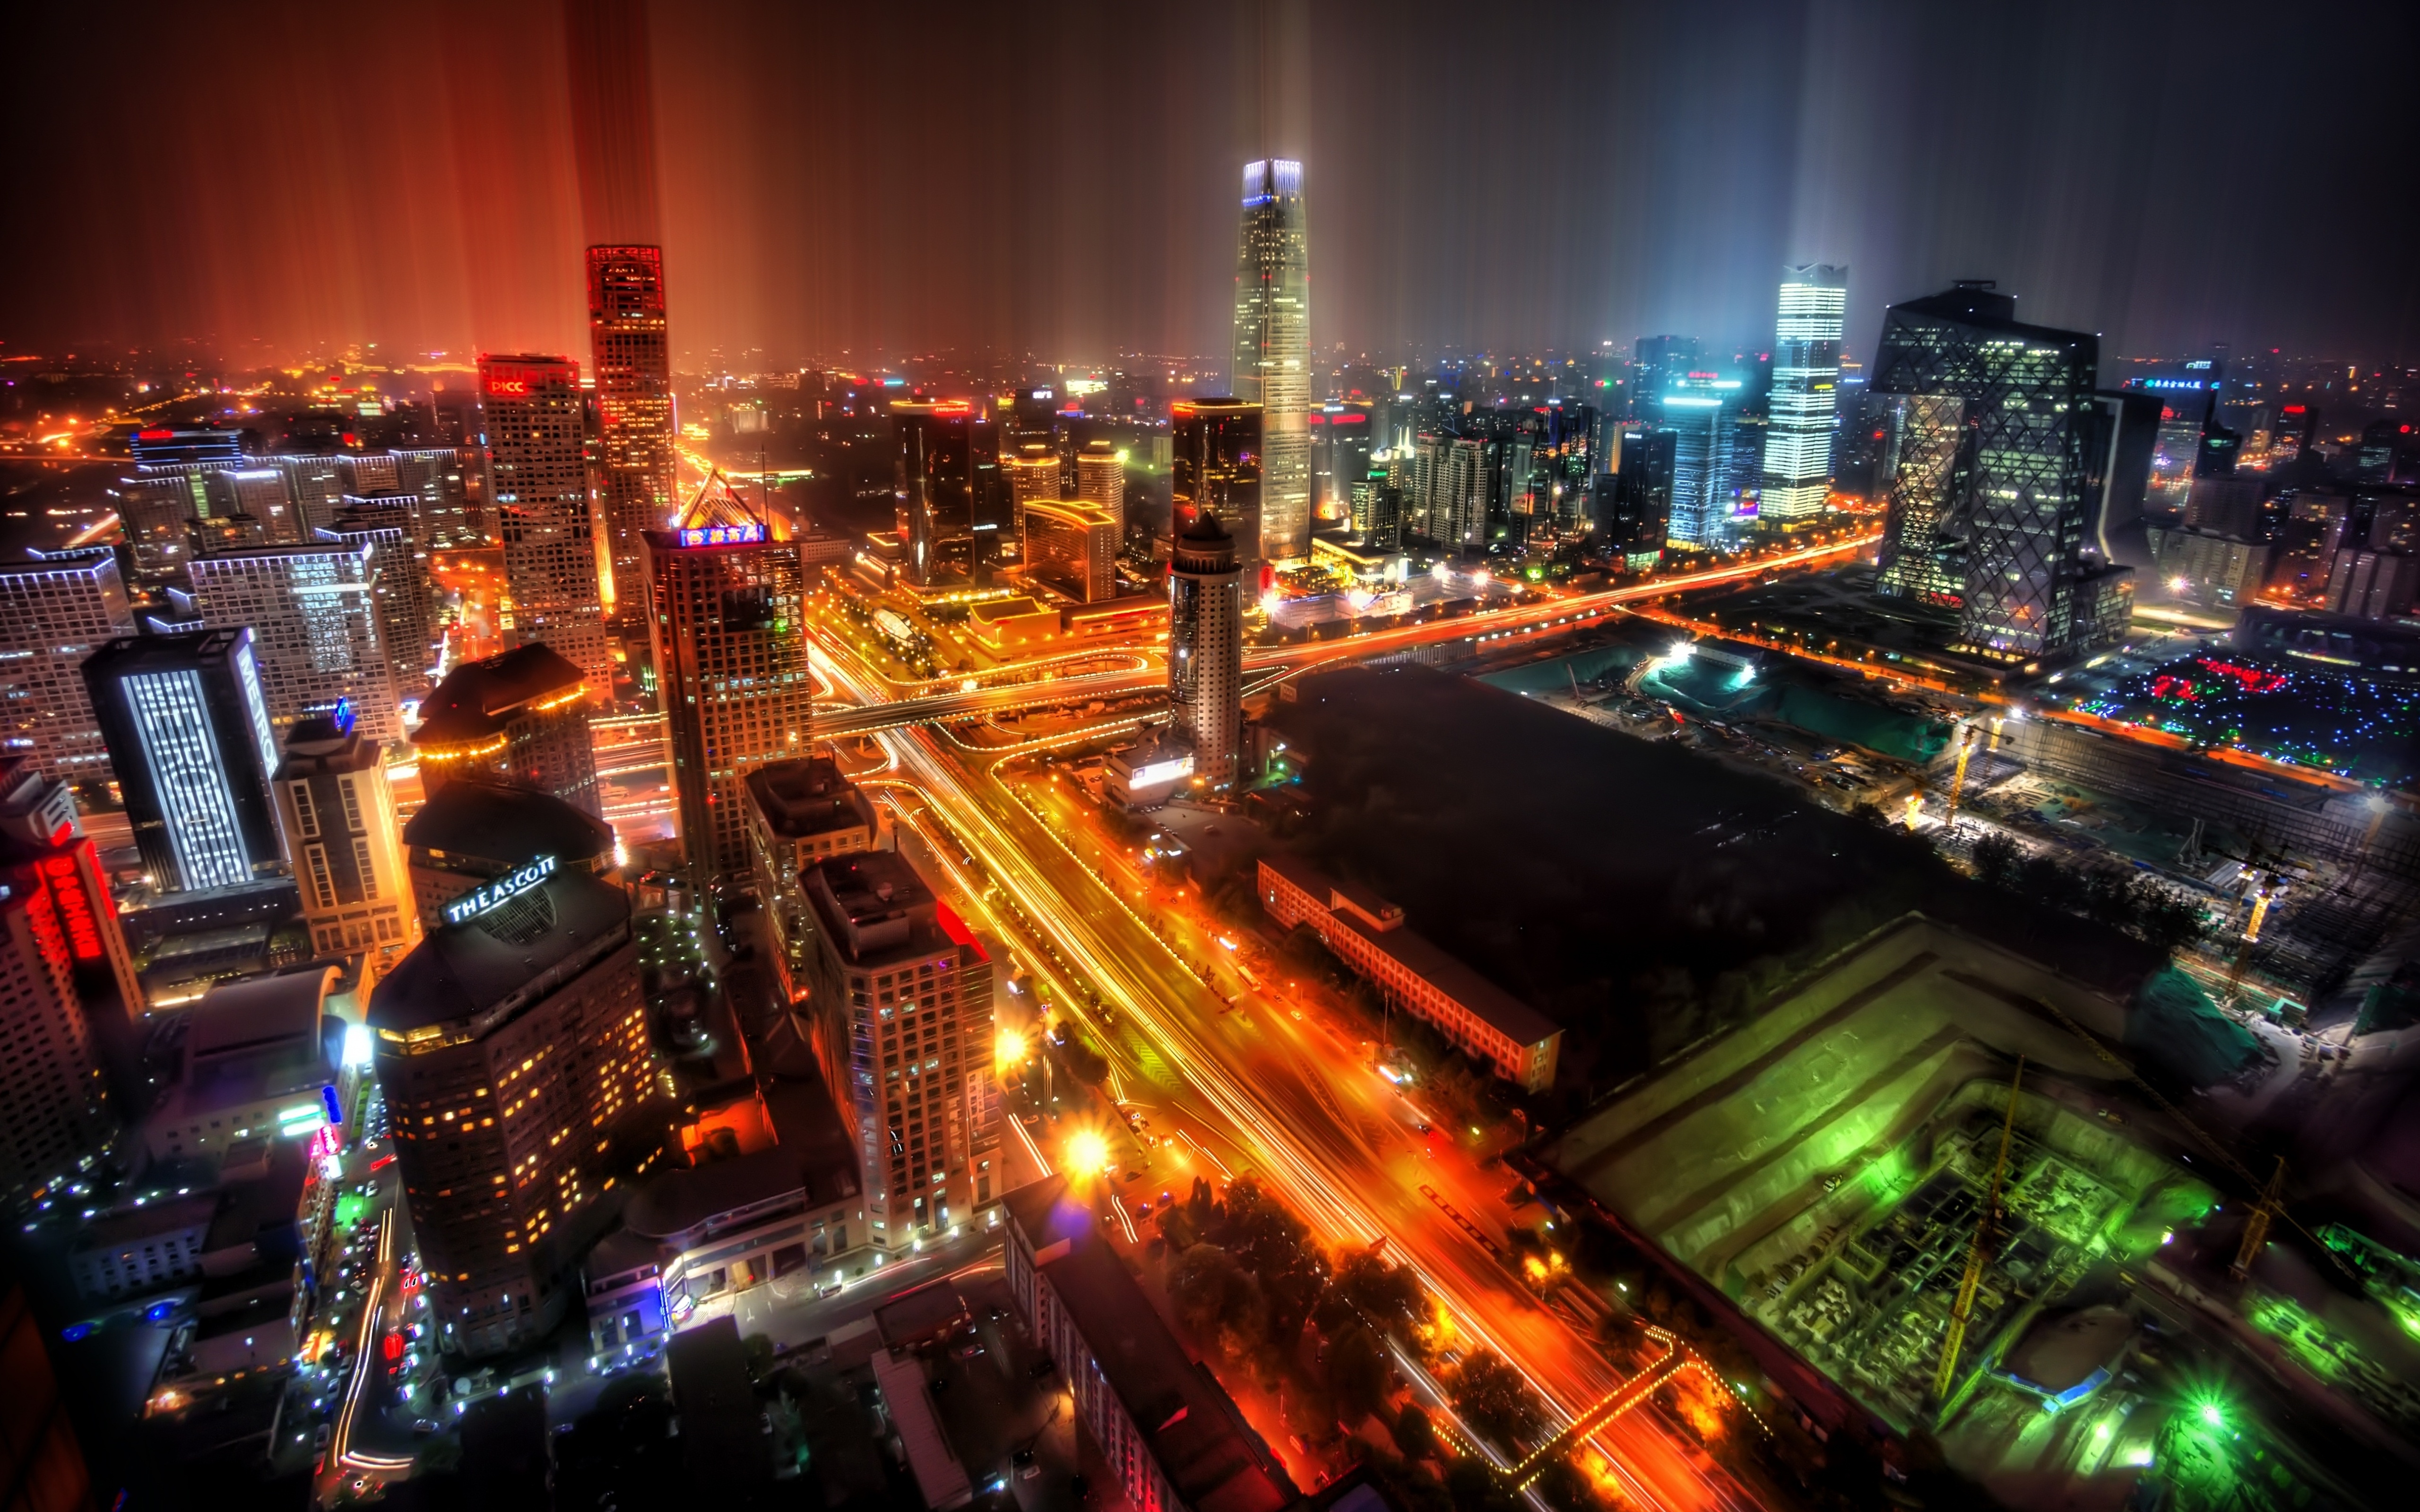 Hd desktop beijing china time lapse building cities light man made night city download free picture